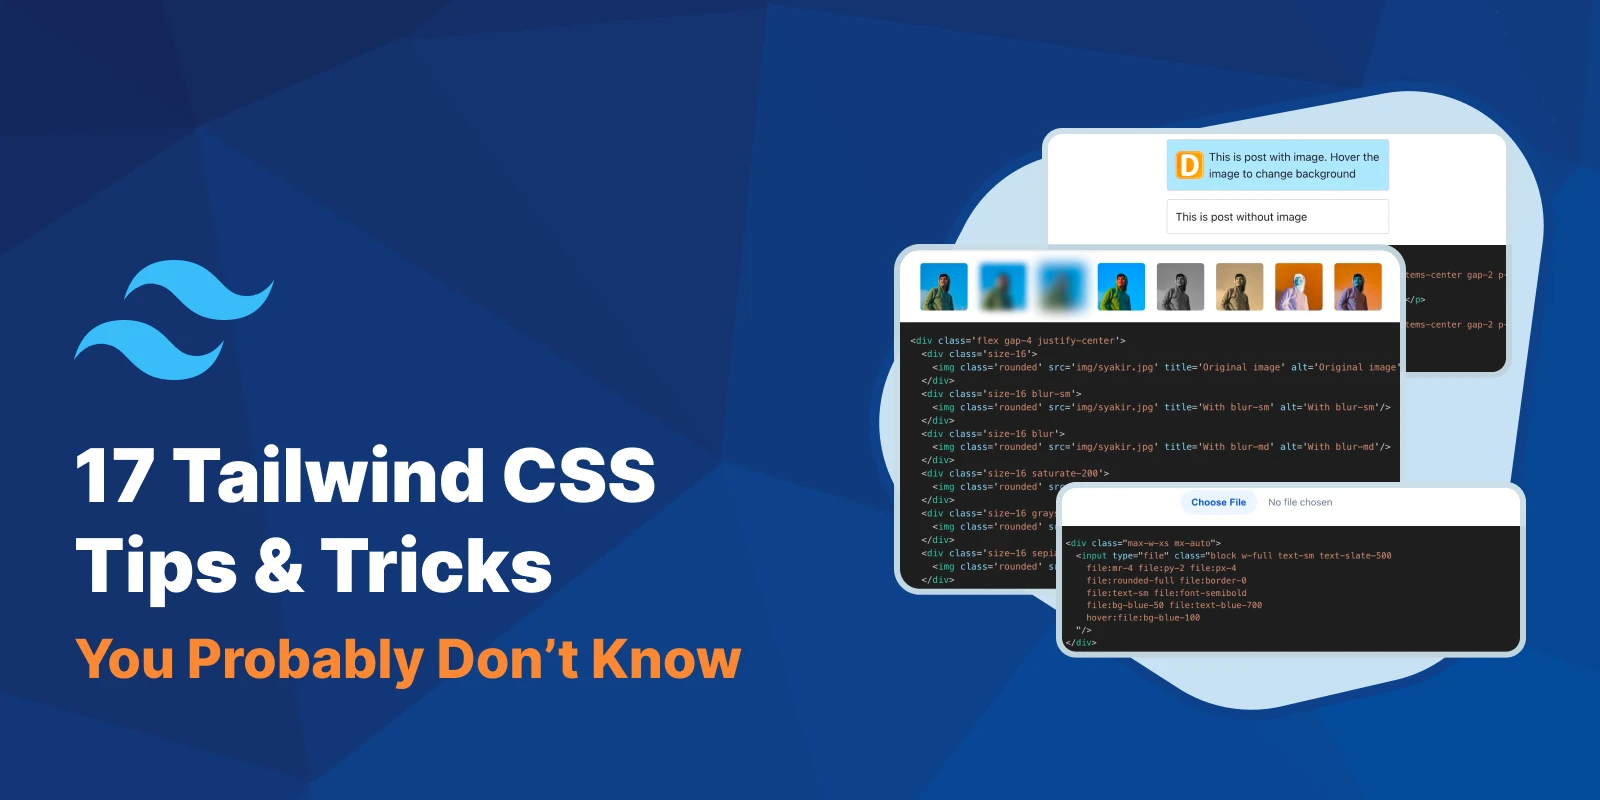 17 Tailwind CSS Tips & Tricks You Probably Don't Know